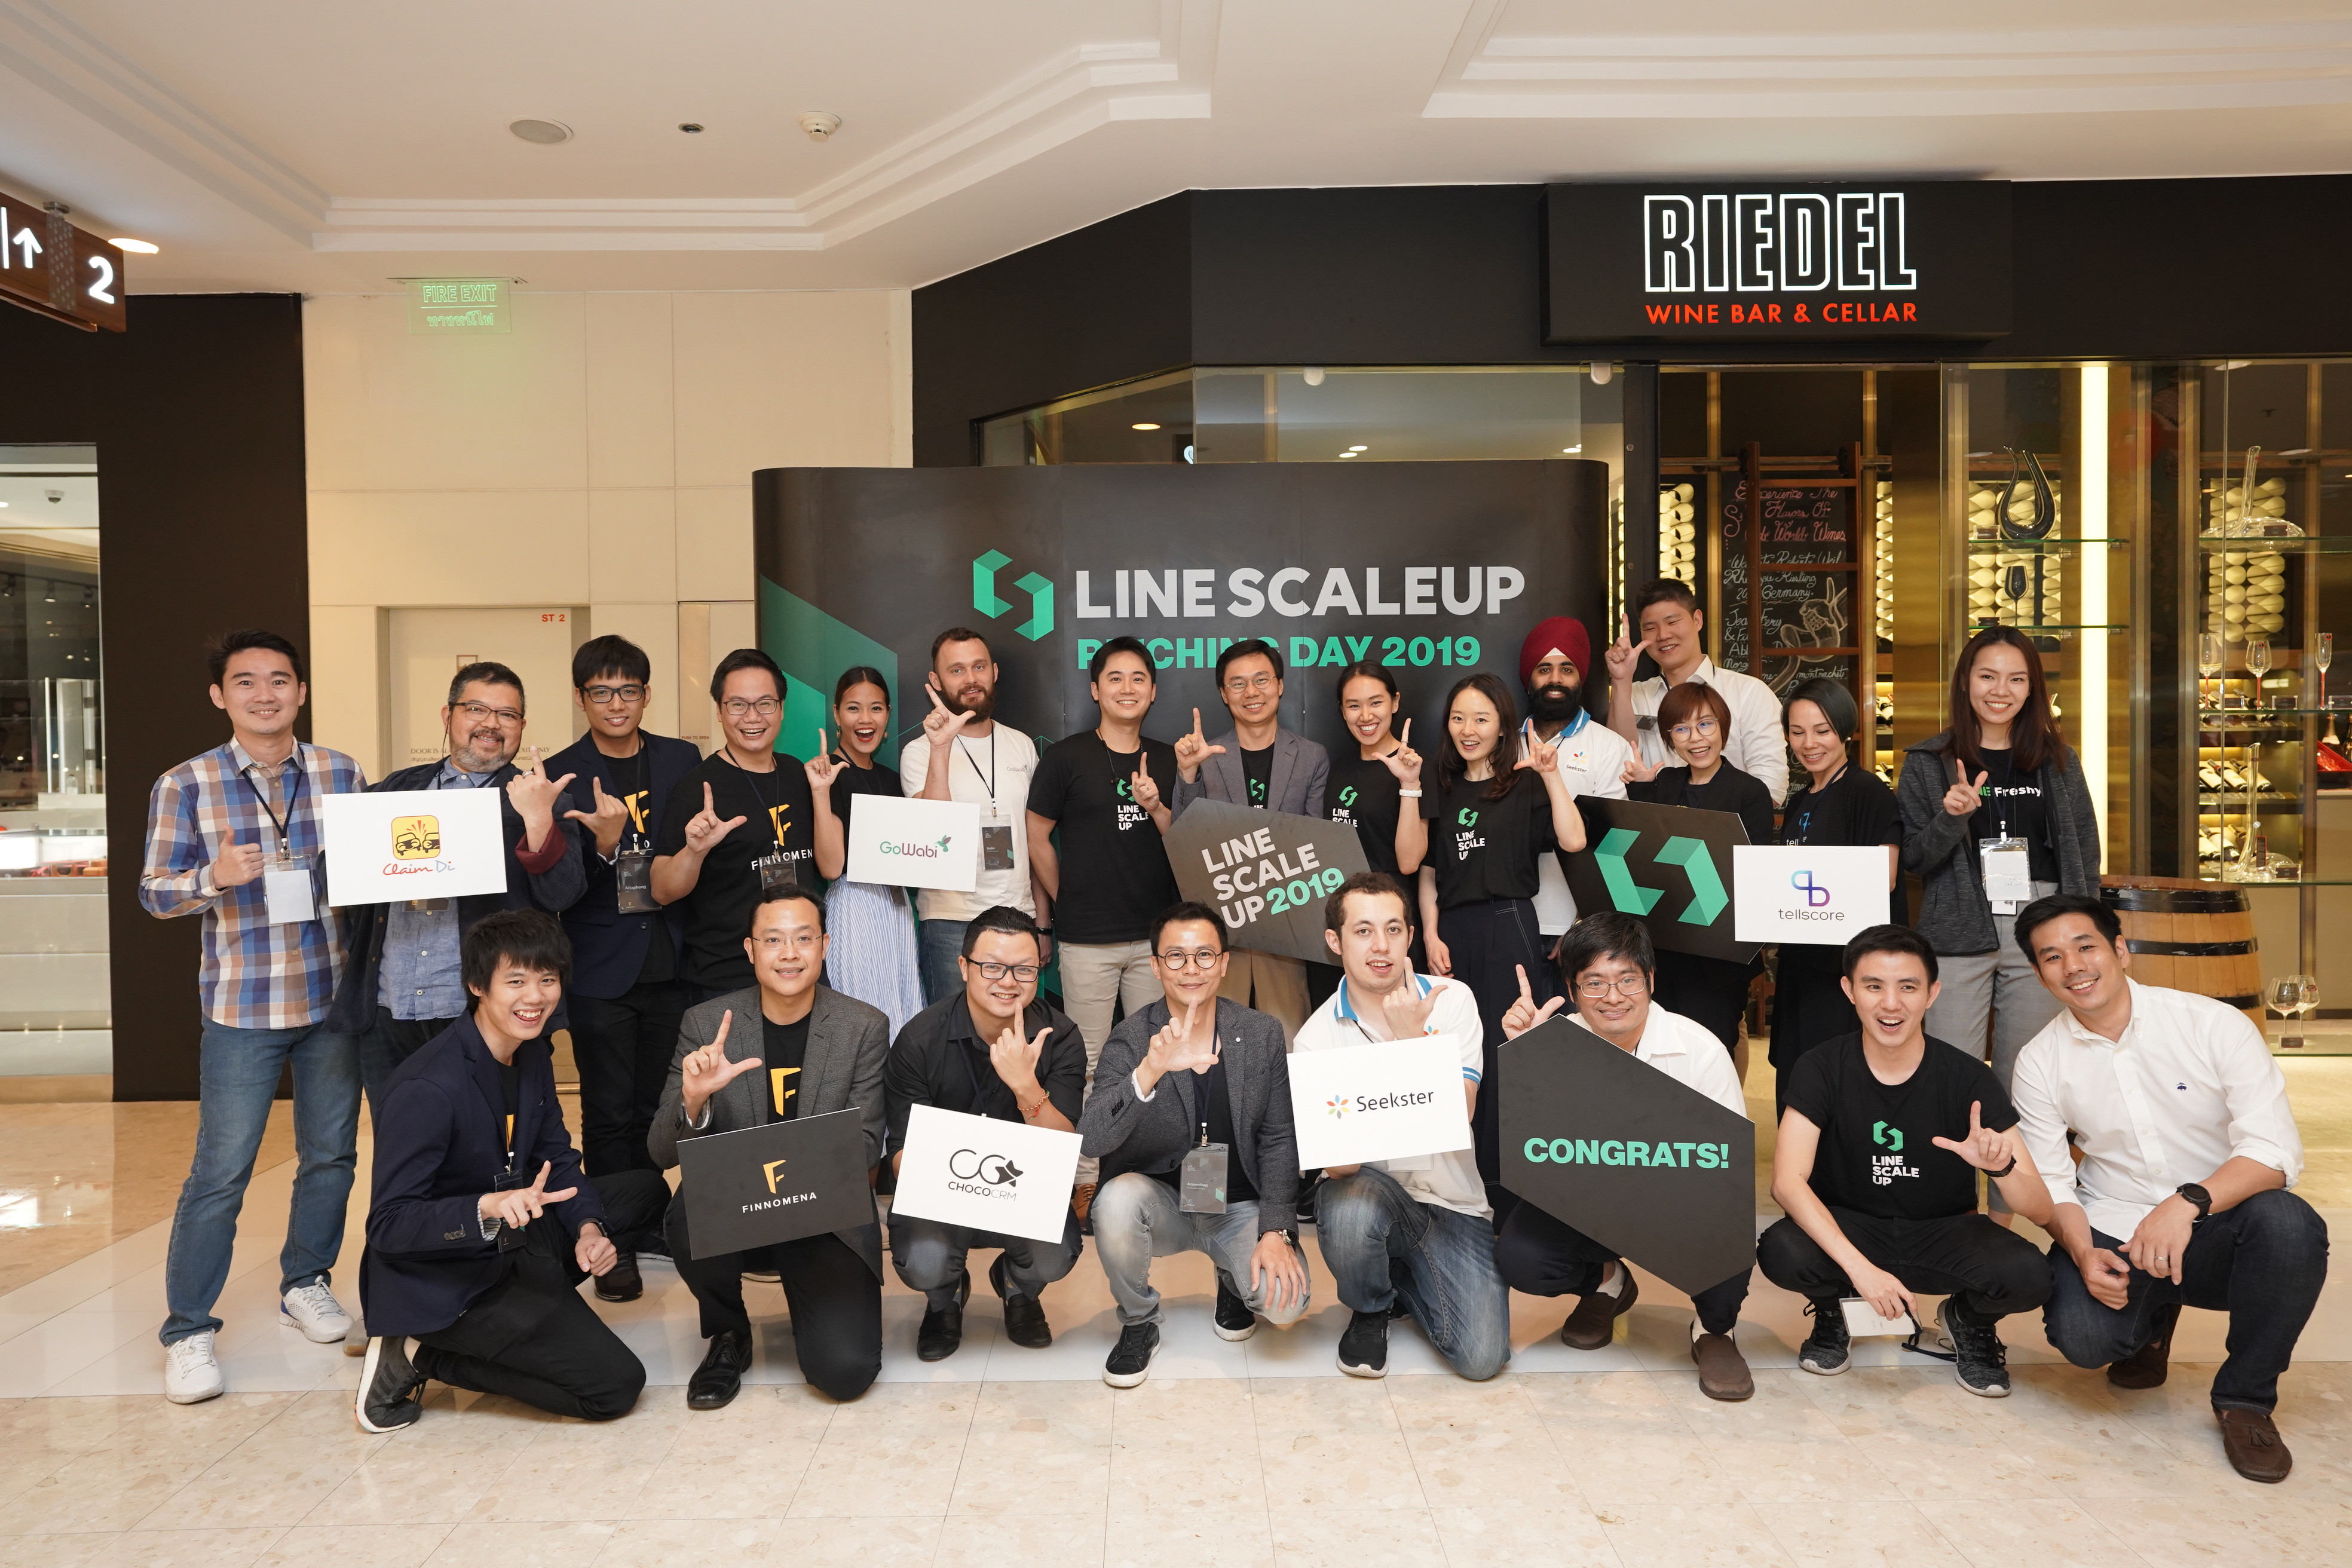 LINE SCALEUP Pitching Day 2019